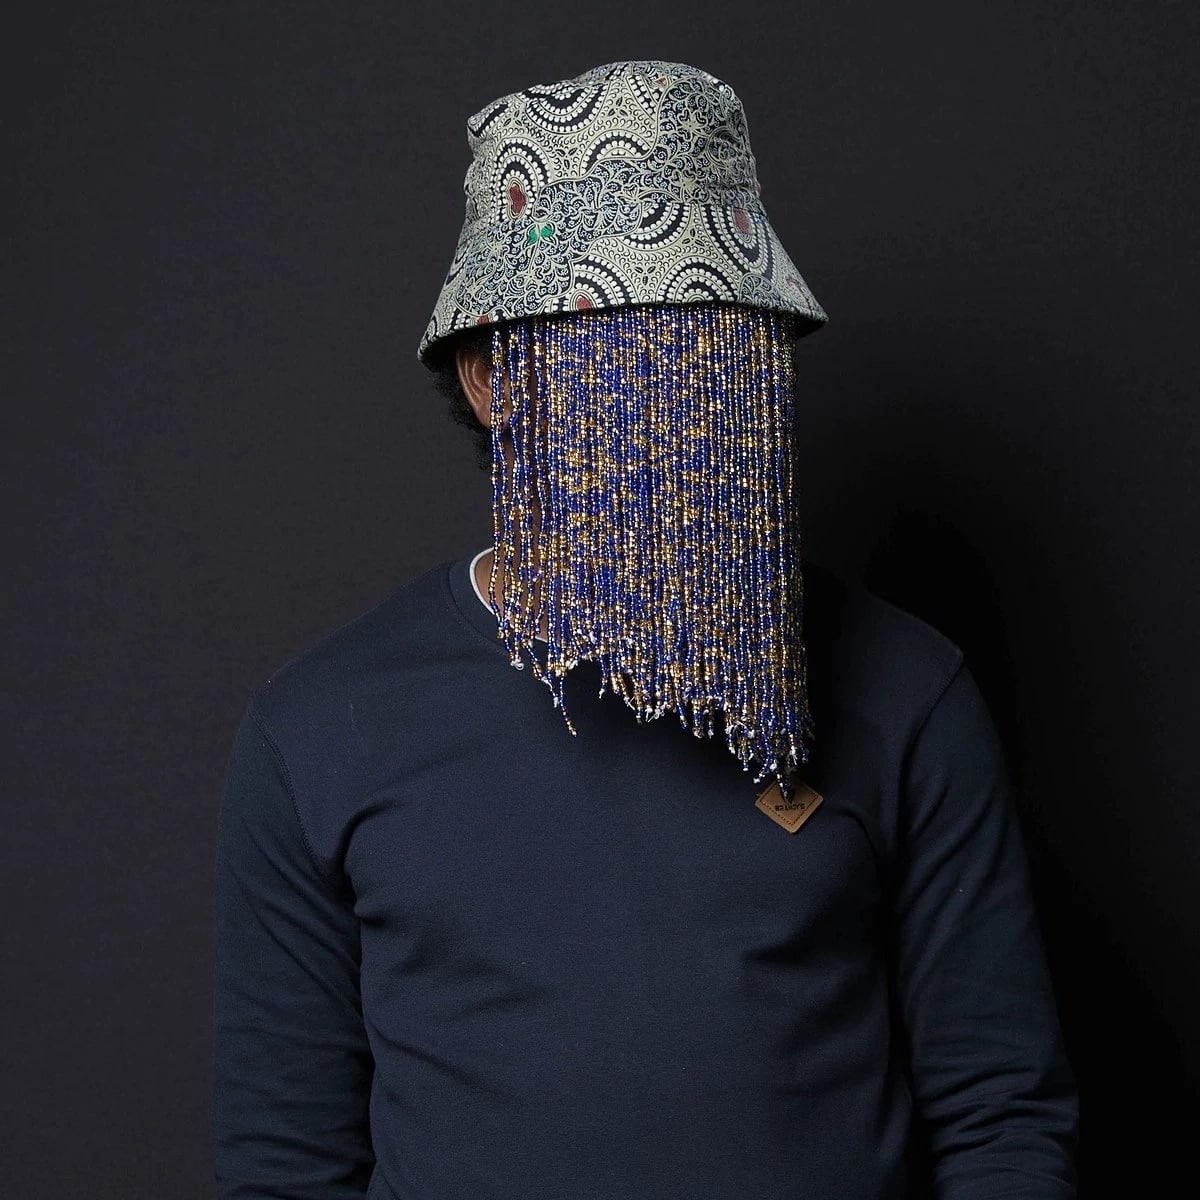 Anas Aremeyaw Anas shows his real face in a recent inteview